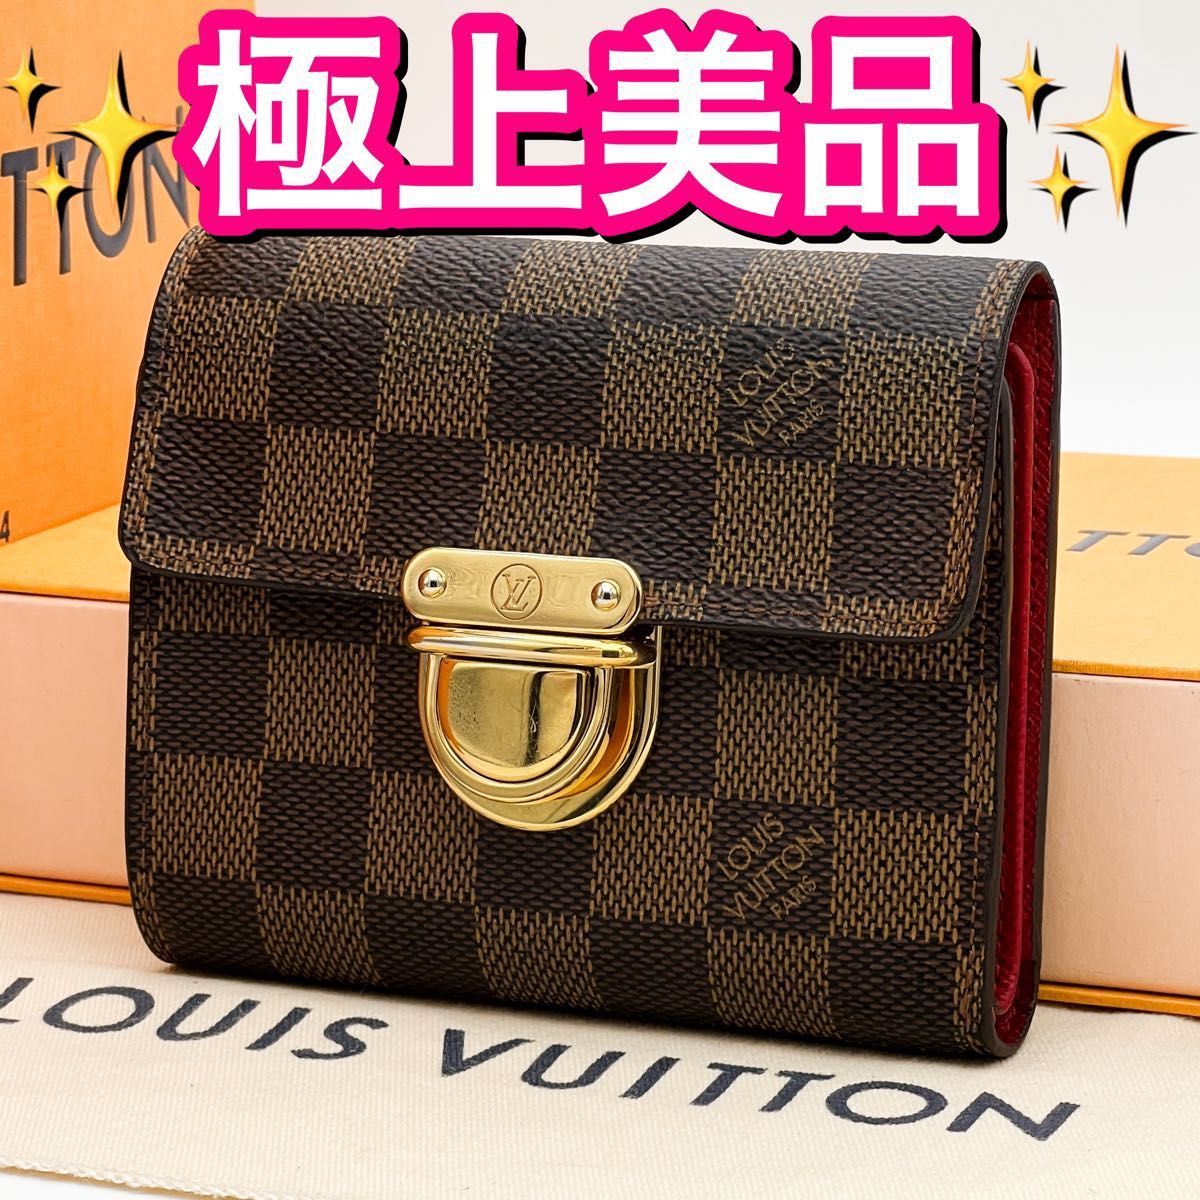 LOUIS VUITTON ルイヴィトン ダミエ ポルトフォイユ コアラ コンパクト